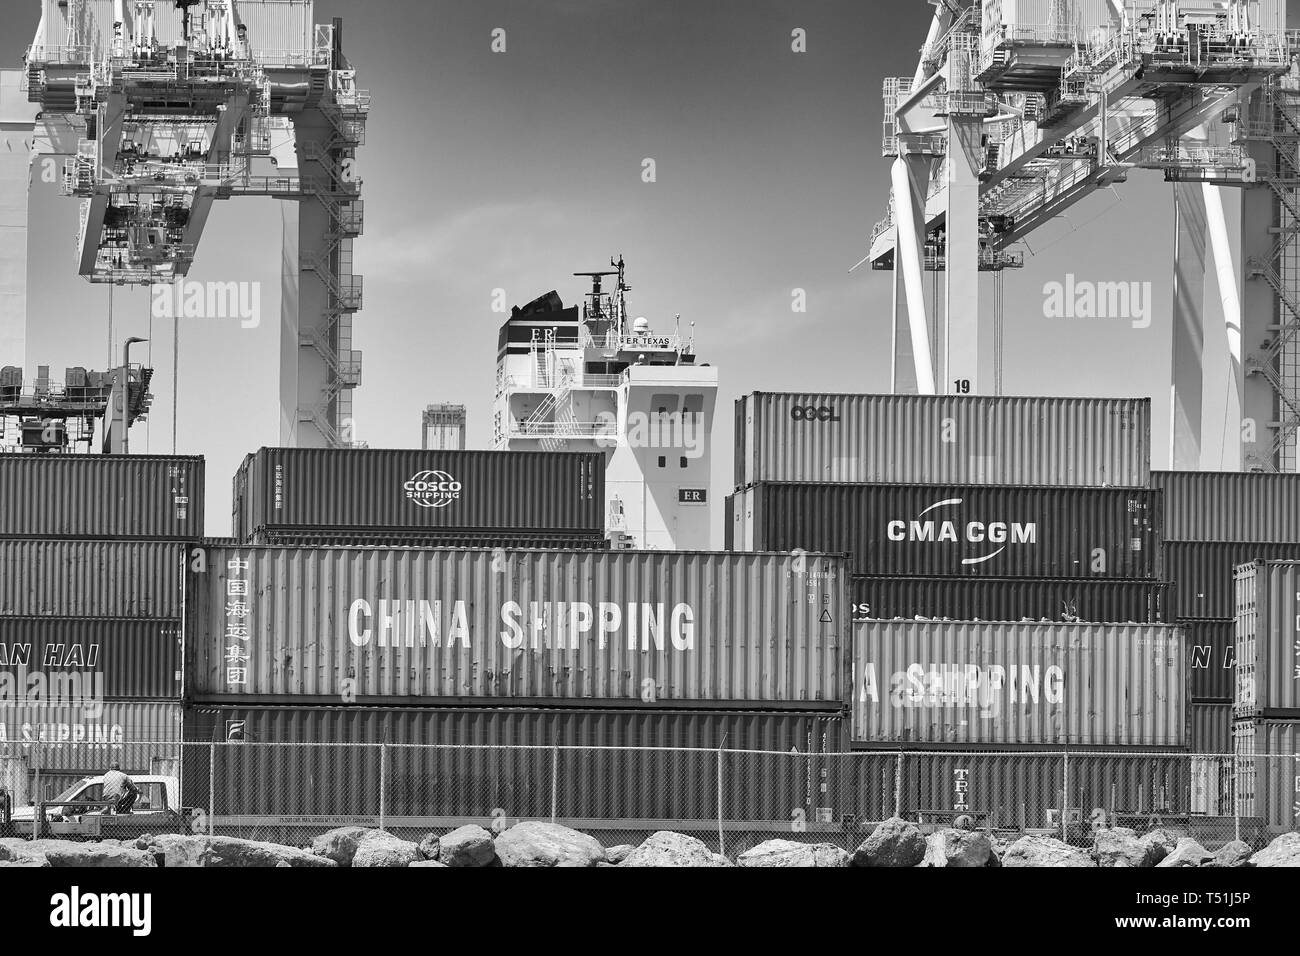 Black & White Image Of The Bridge Of The Container Ship, E.R. Texas, Berthed At Pier J In The Long Beach Container Terminal, California. USA. Stock Photo